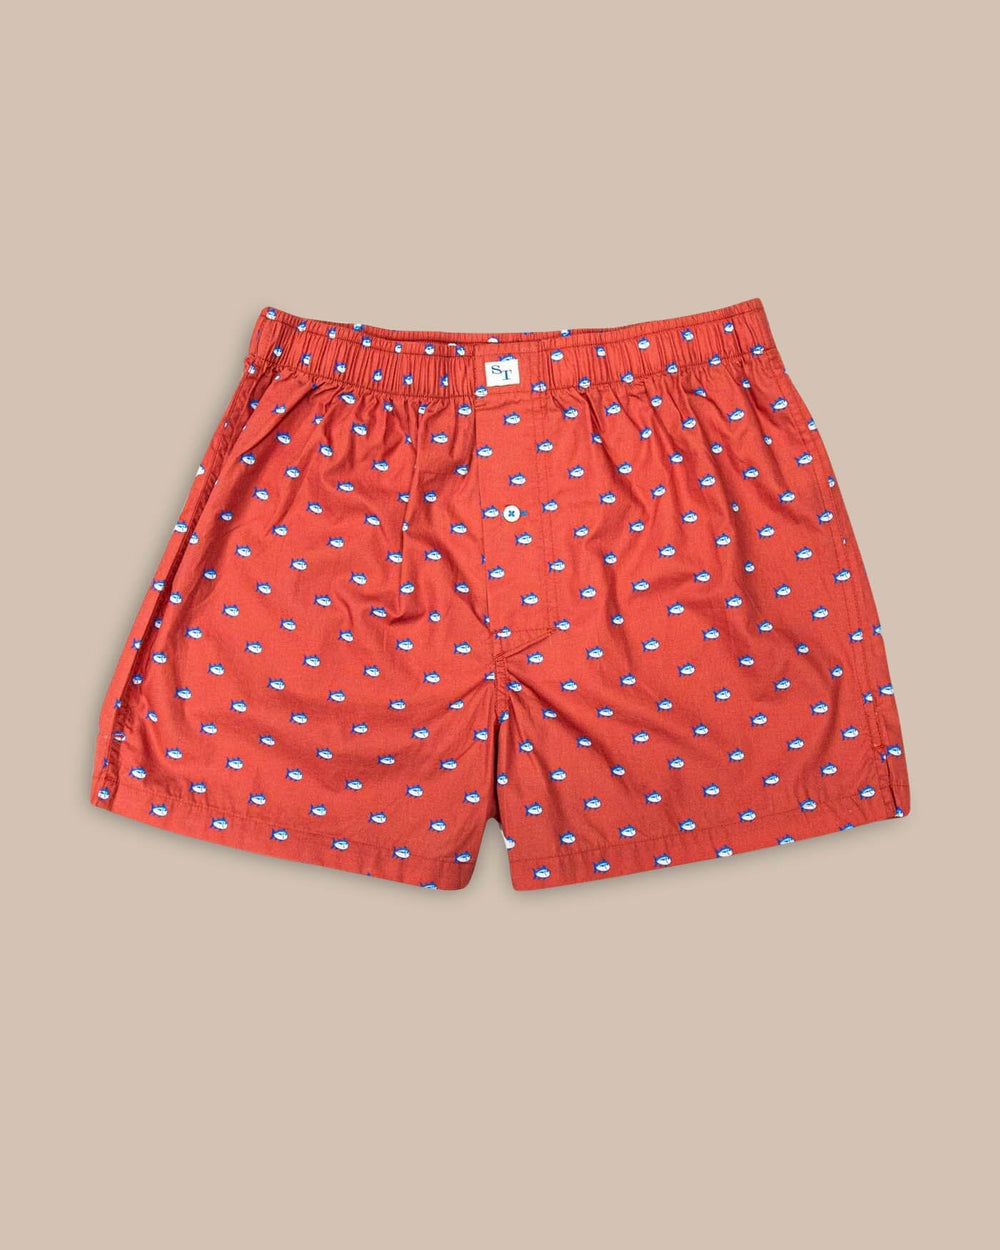 The front view of the Southern Tide Skipjack Boxer Short by Southern Tide - Dusty Coral